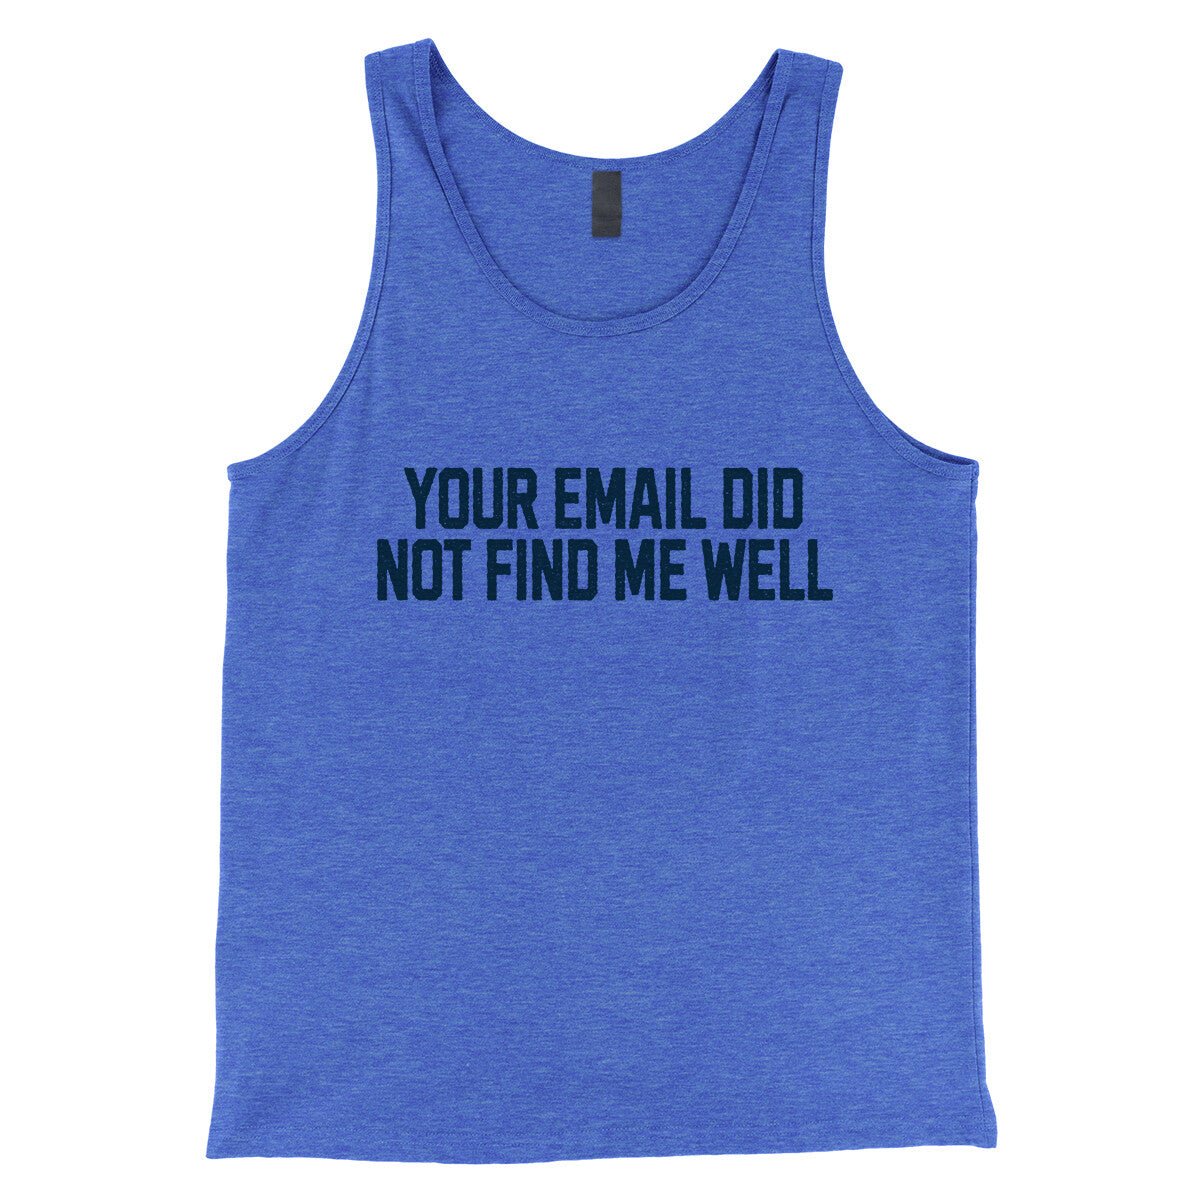 Your Email Did Not Find Me Well in True Royal TriBlend Color